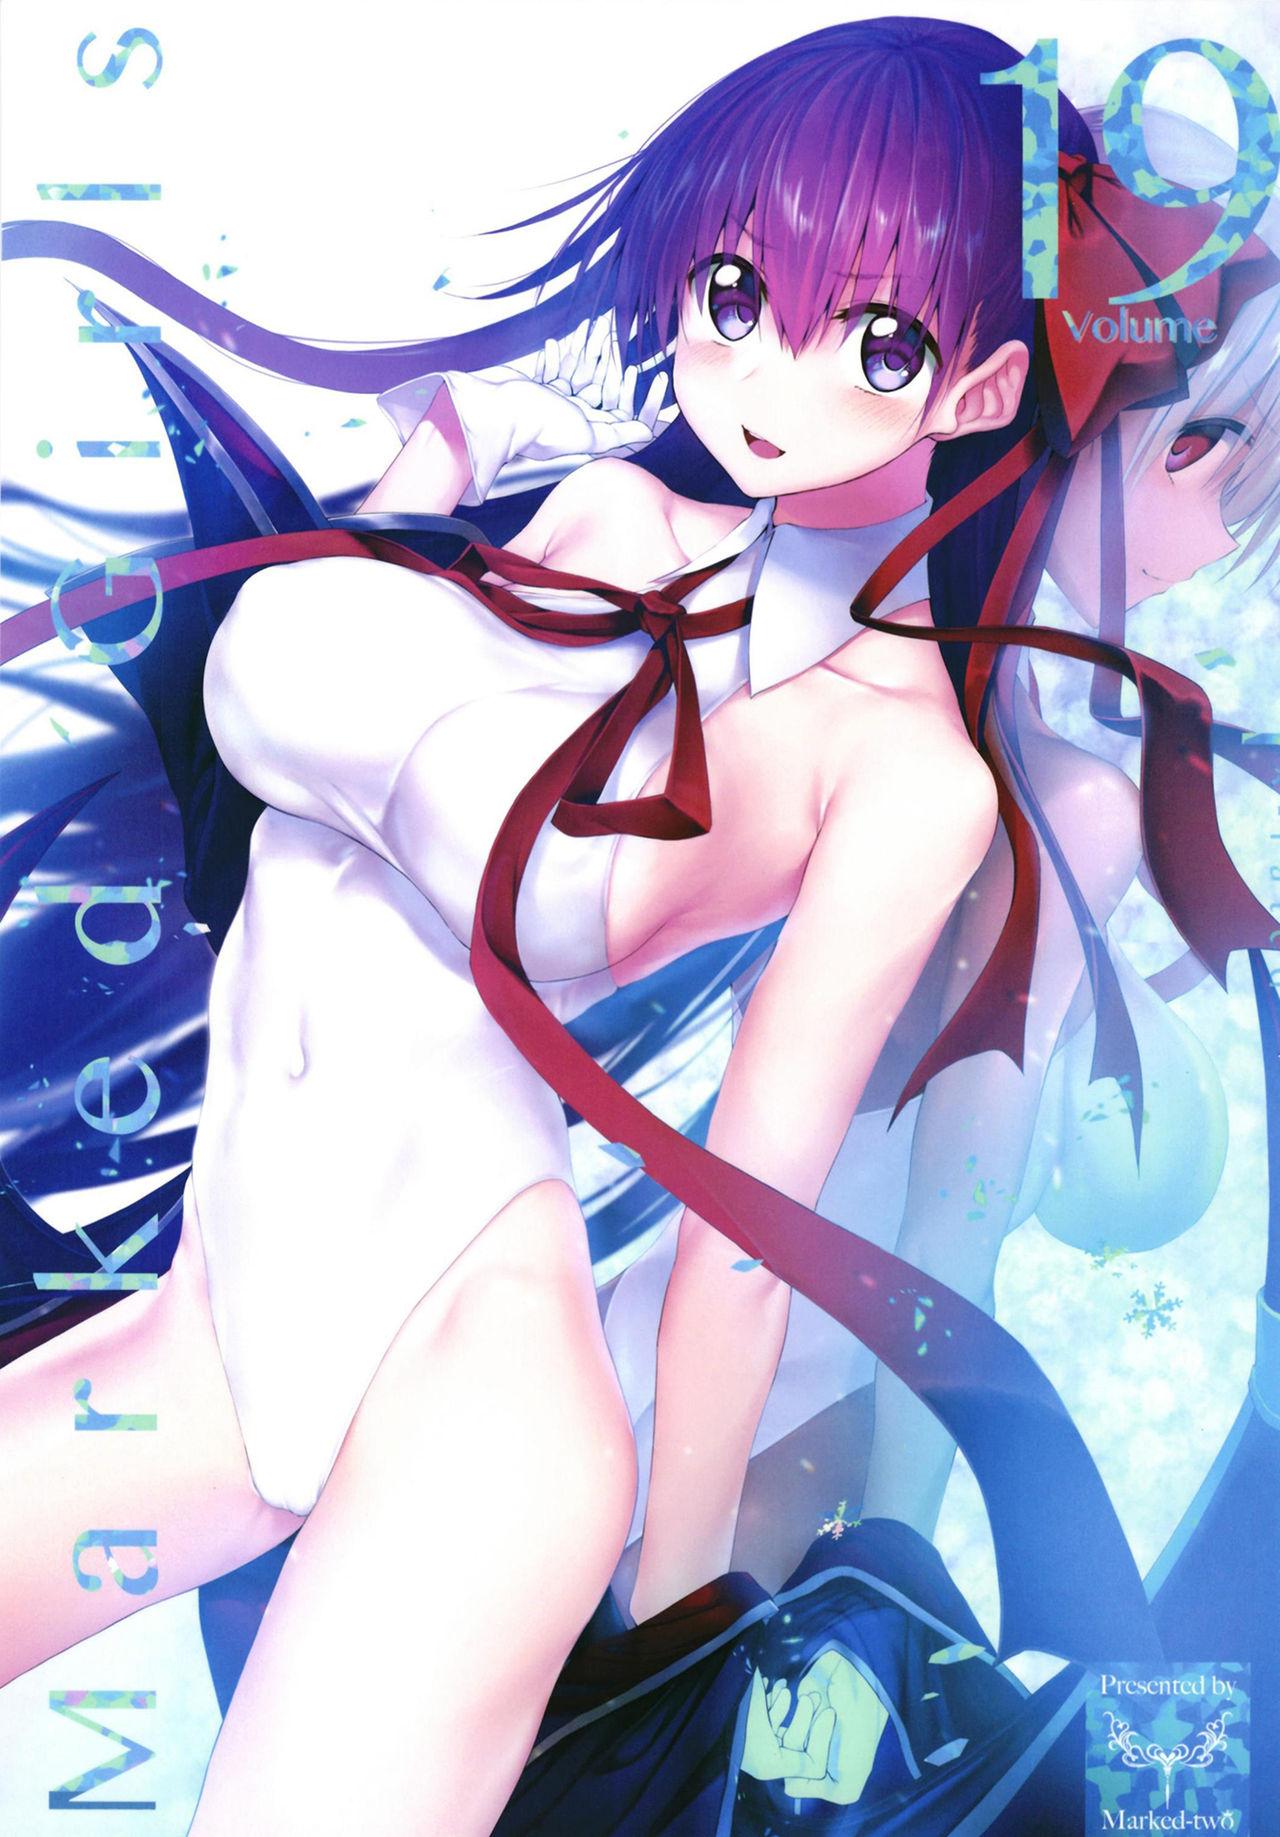 Hot Milf Marked Girls Vol. 19 - Fate grand order Mature Woman - Picture 1